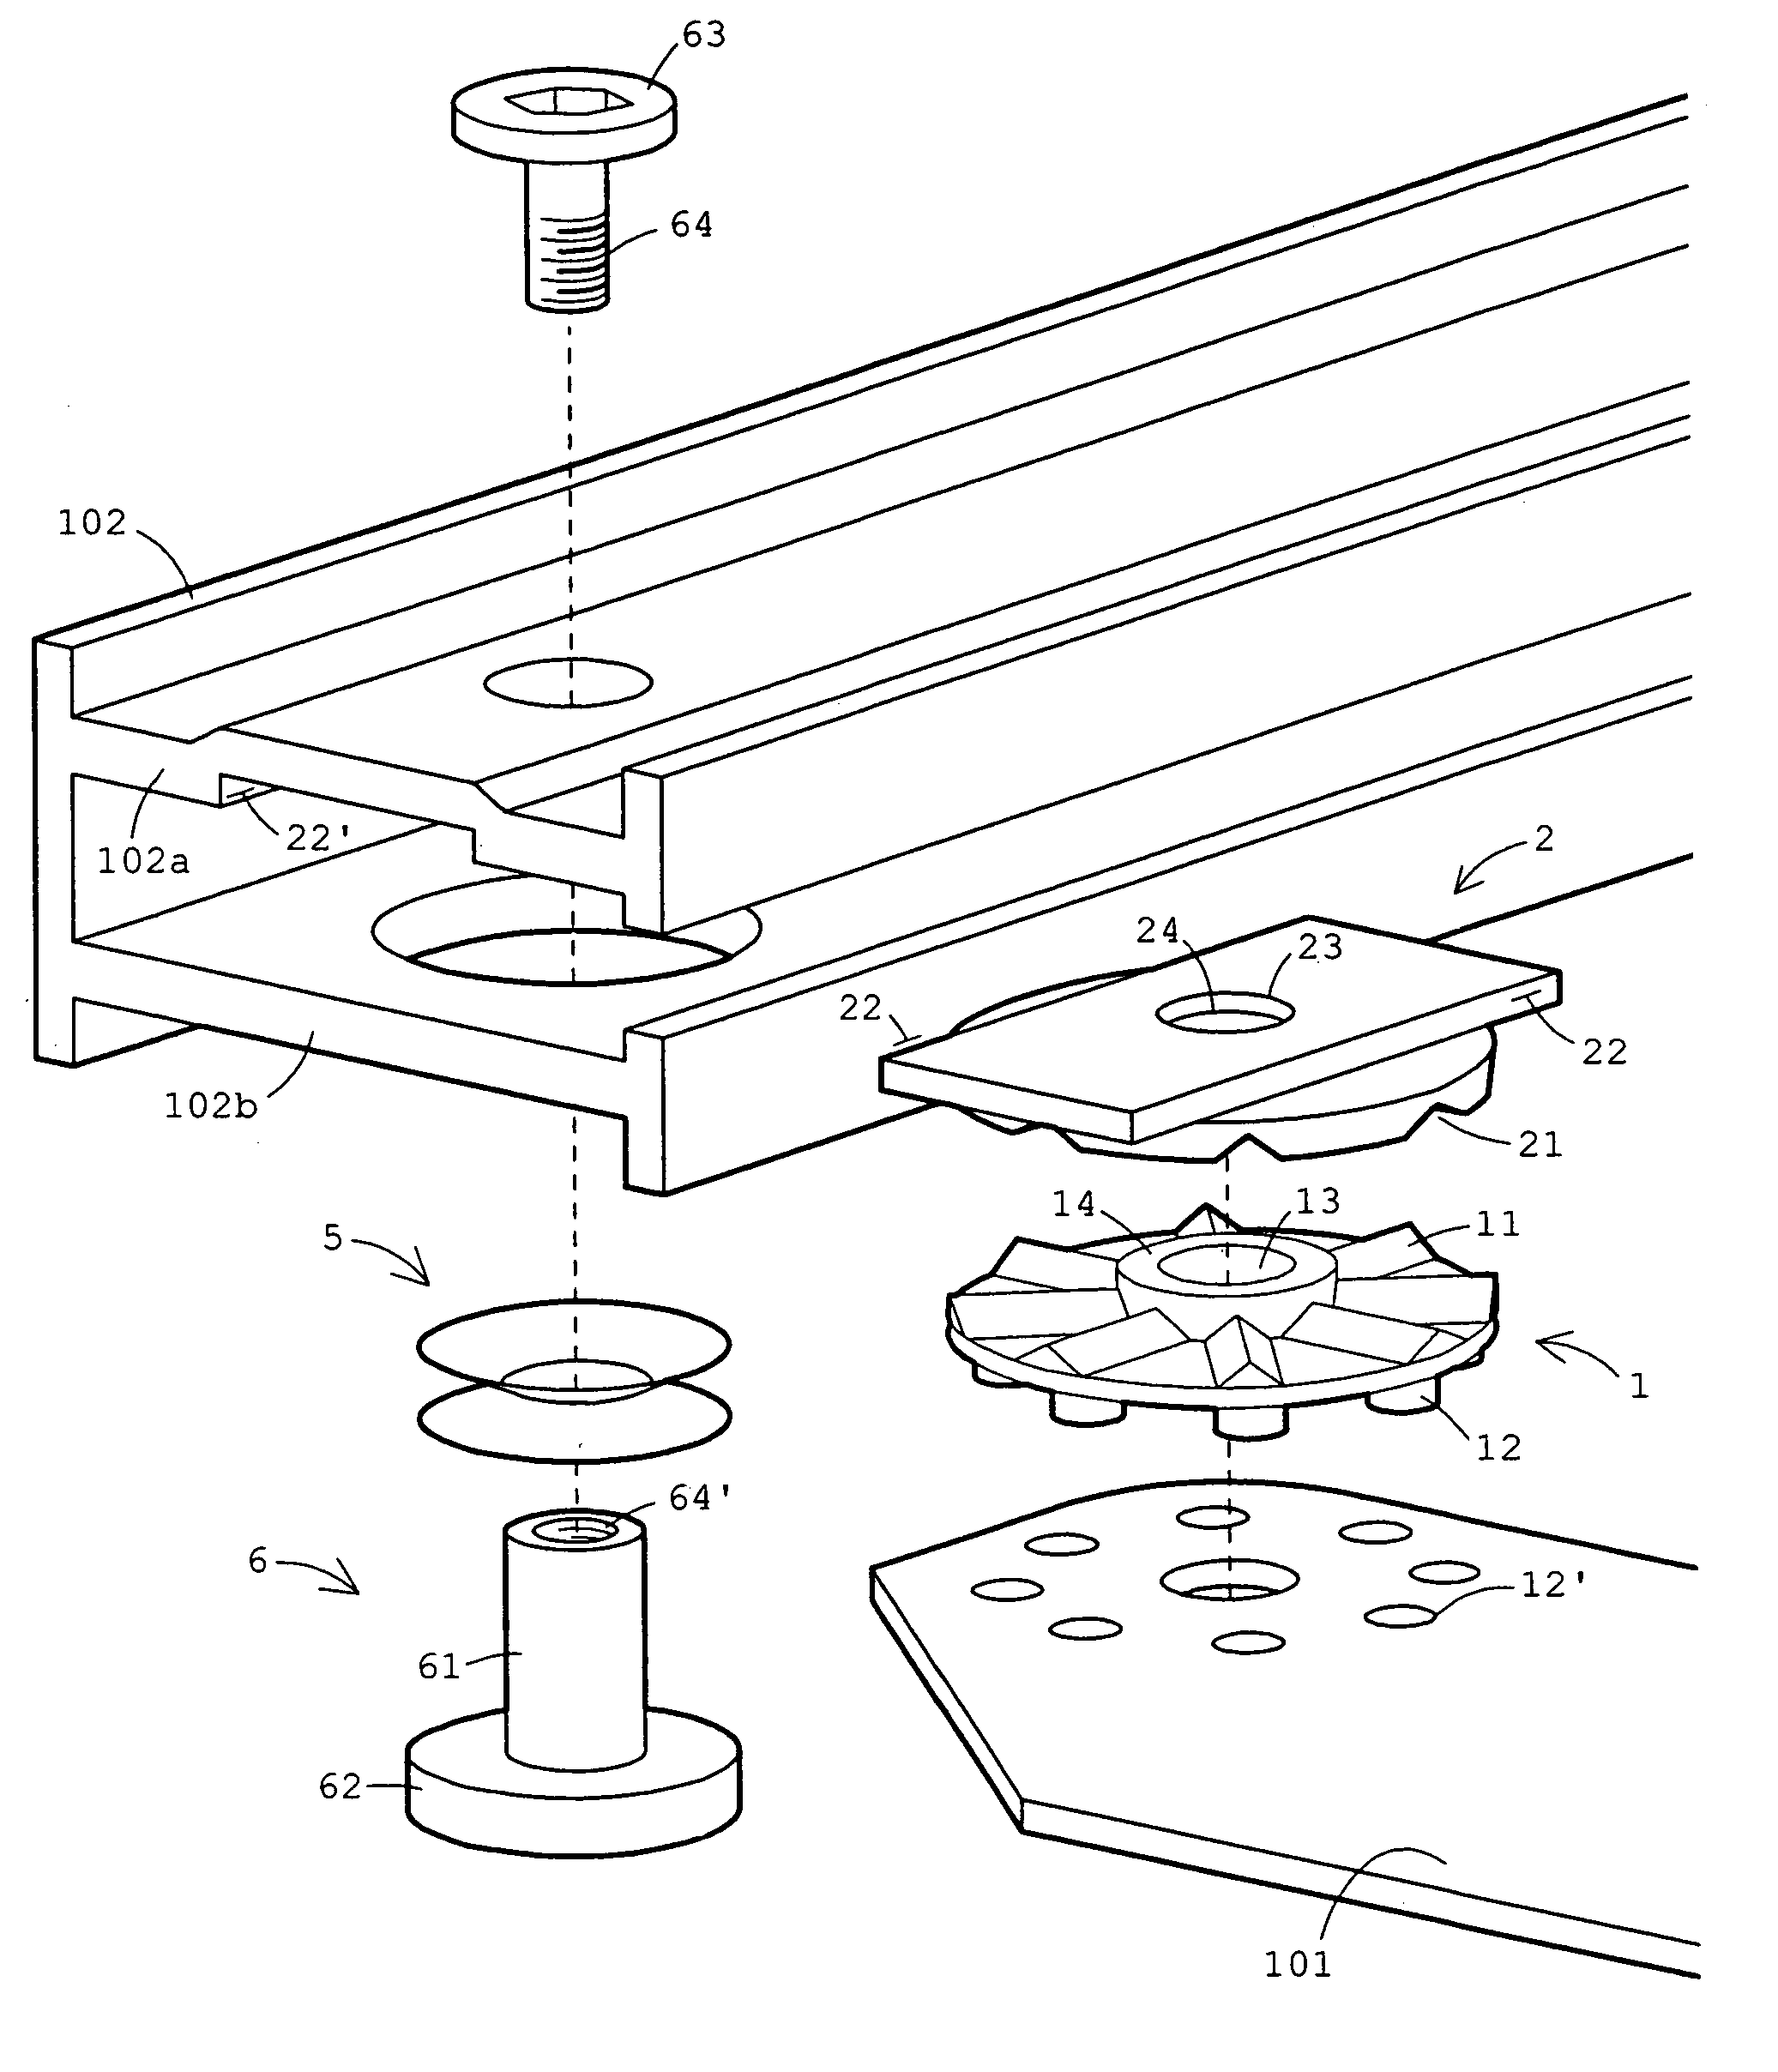 Snap locking angle adjustable device, in particular a carpenter's square